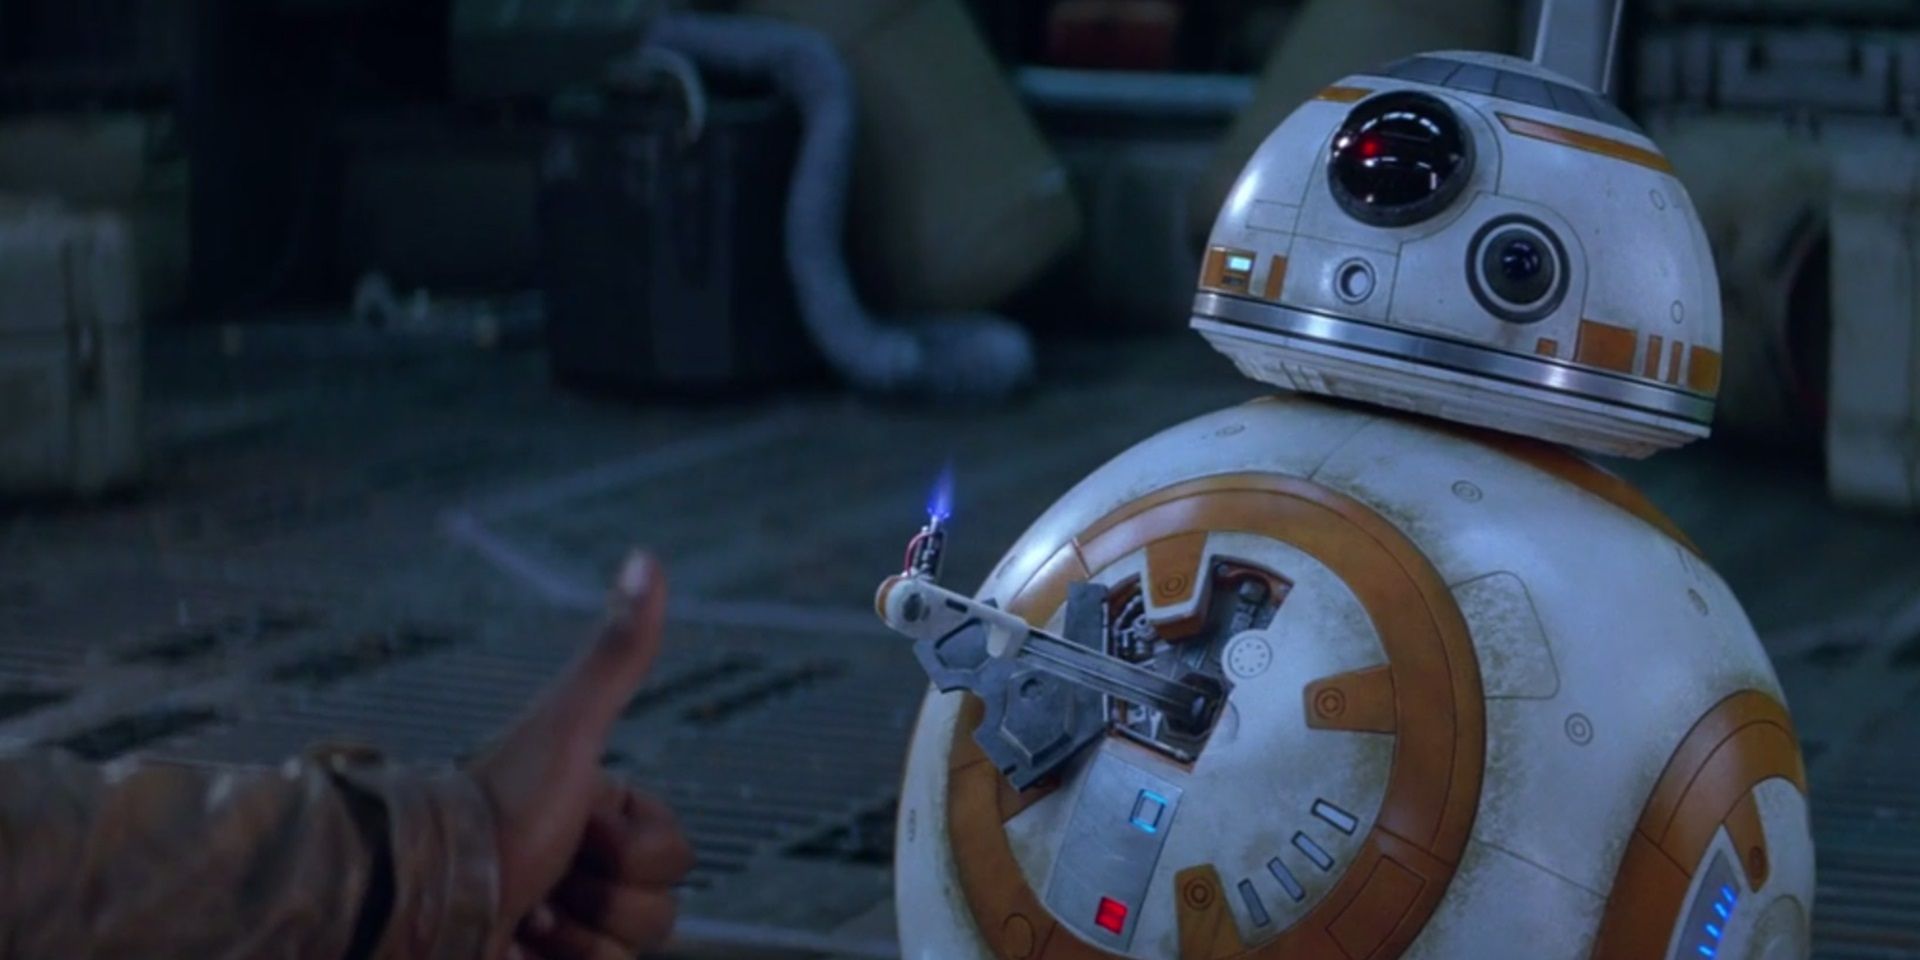 BB-8 in Star Wars The Force Awakens